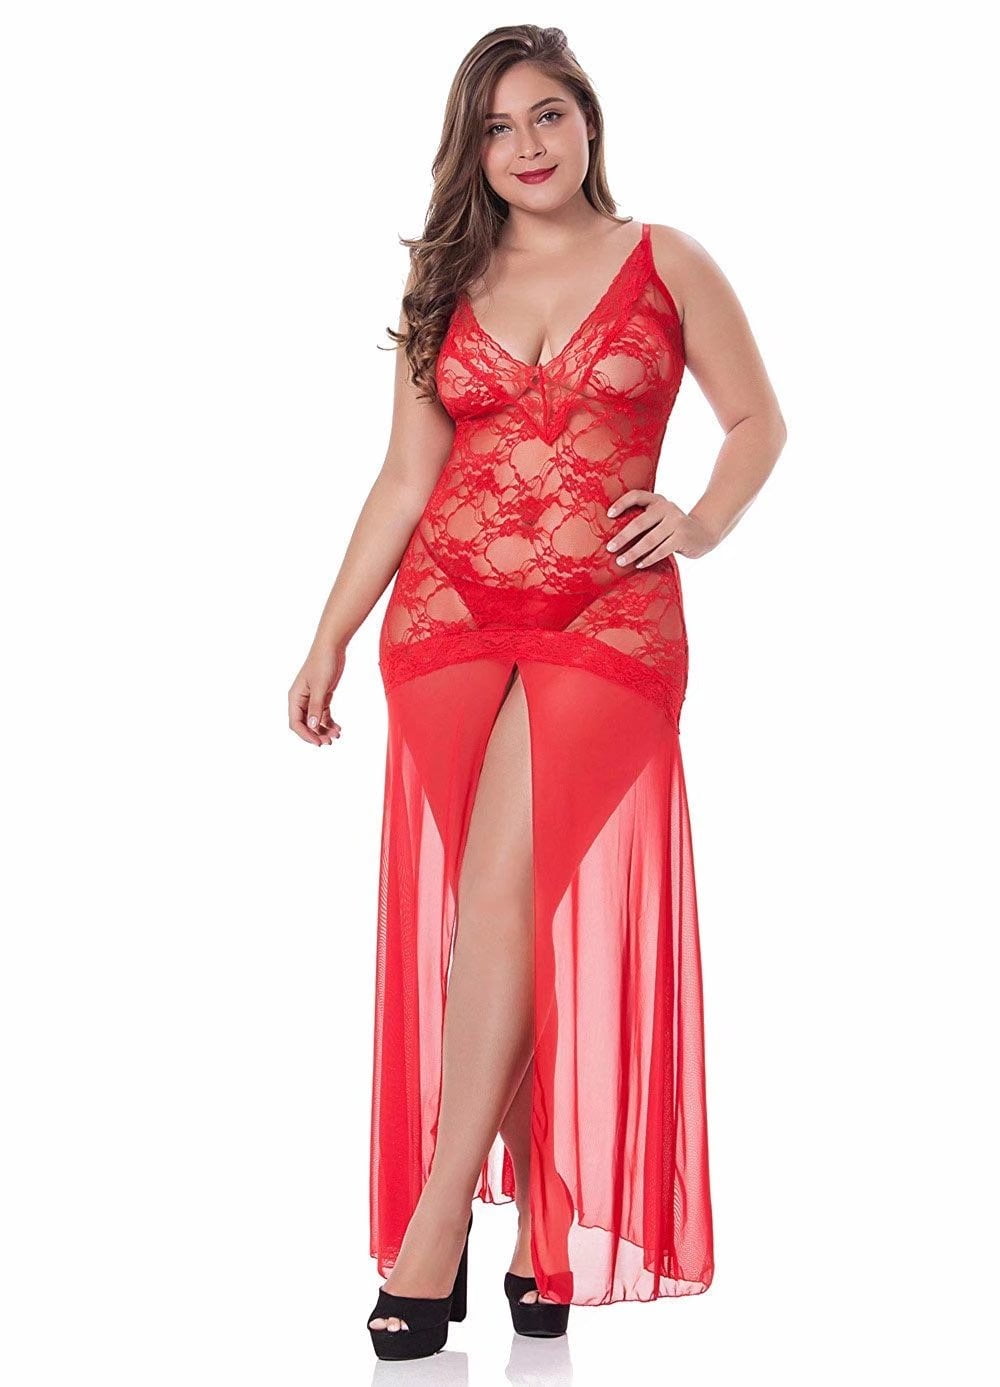 LINGERLOVE Plus Size Sexy Babydoll Lingerie for Women Lace Nightgown with  Underwire